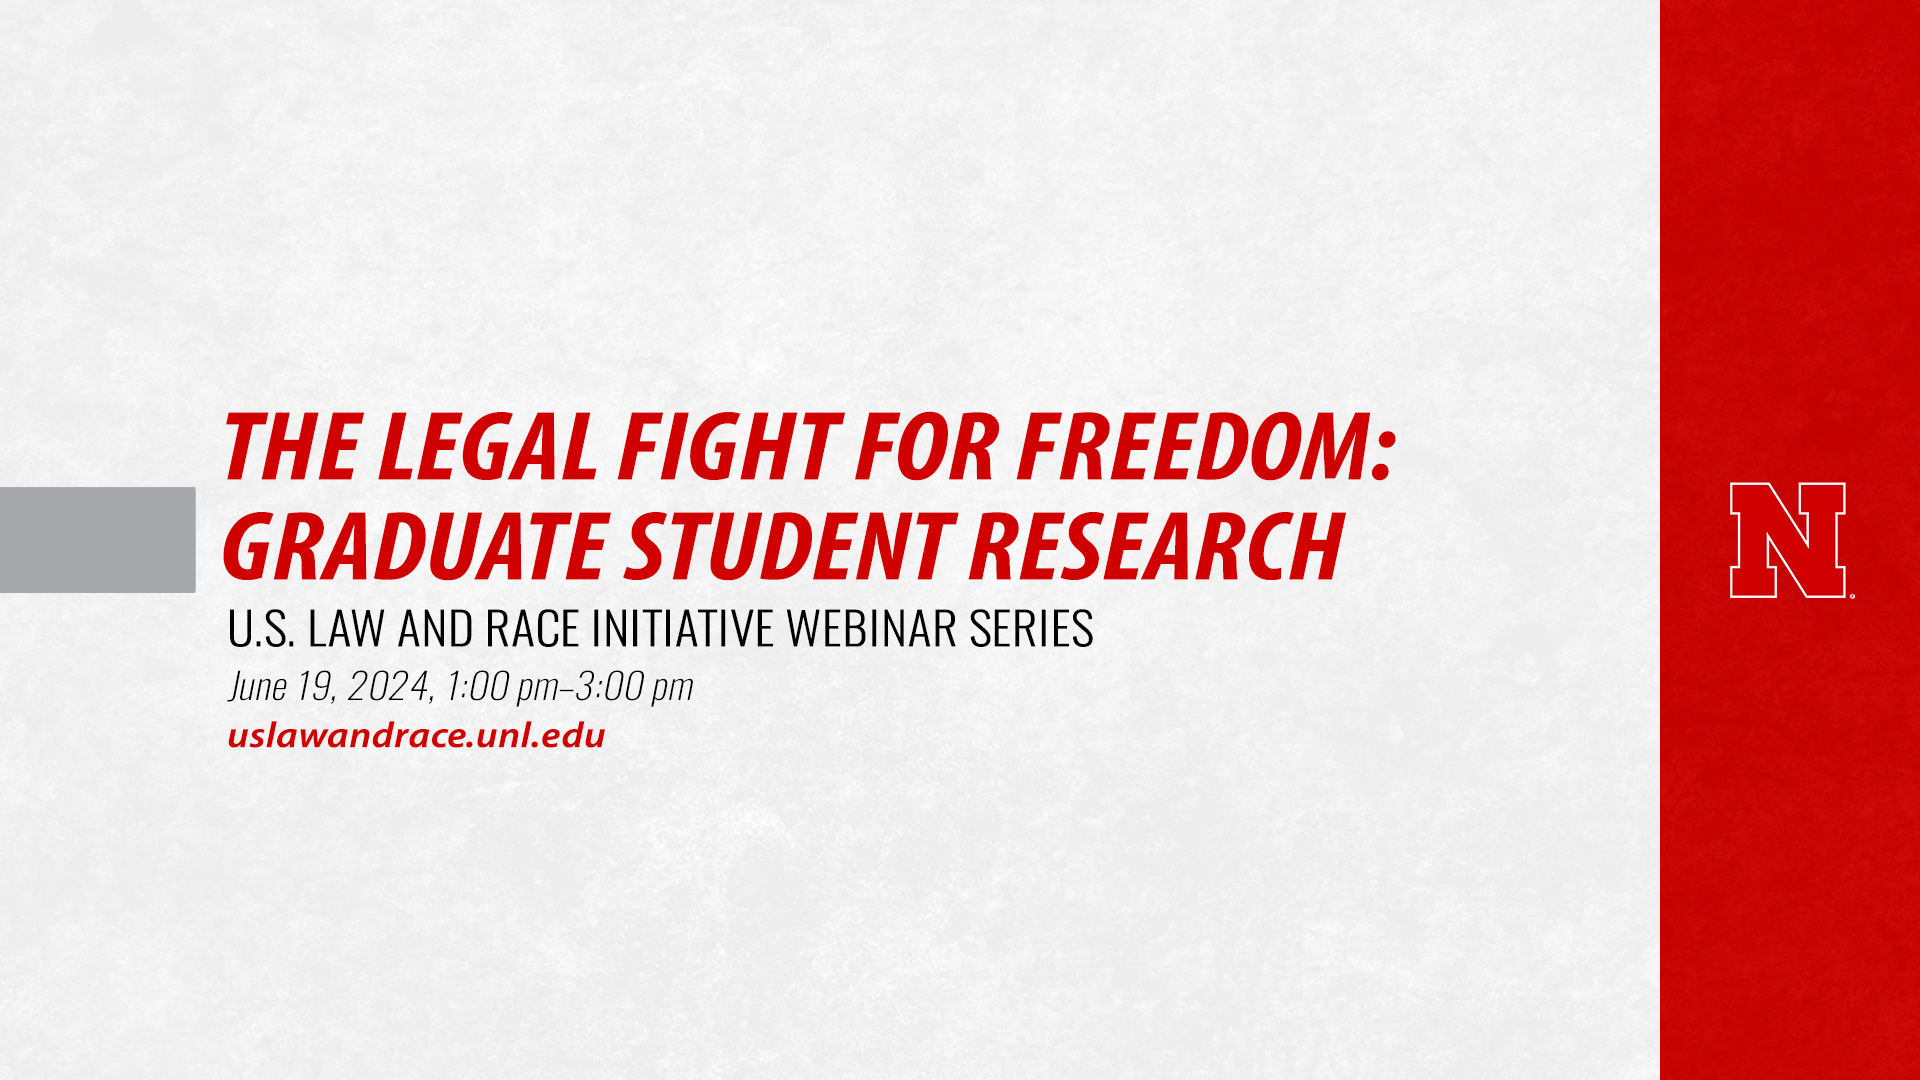 The Legal Fight for Freedom: Graduate Student Research